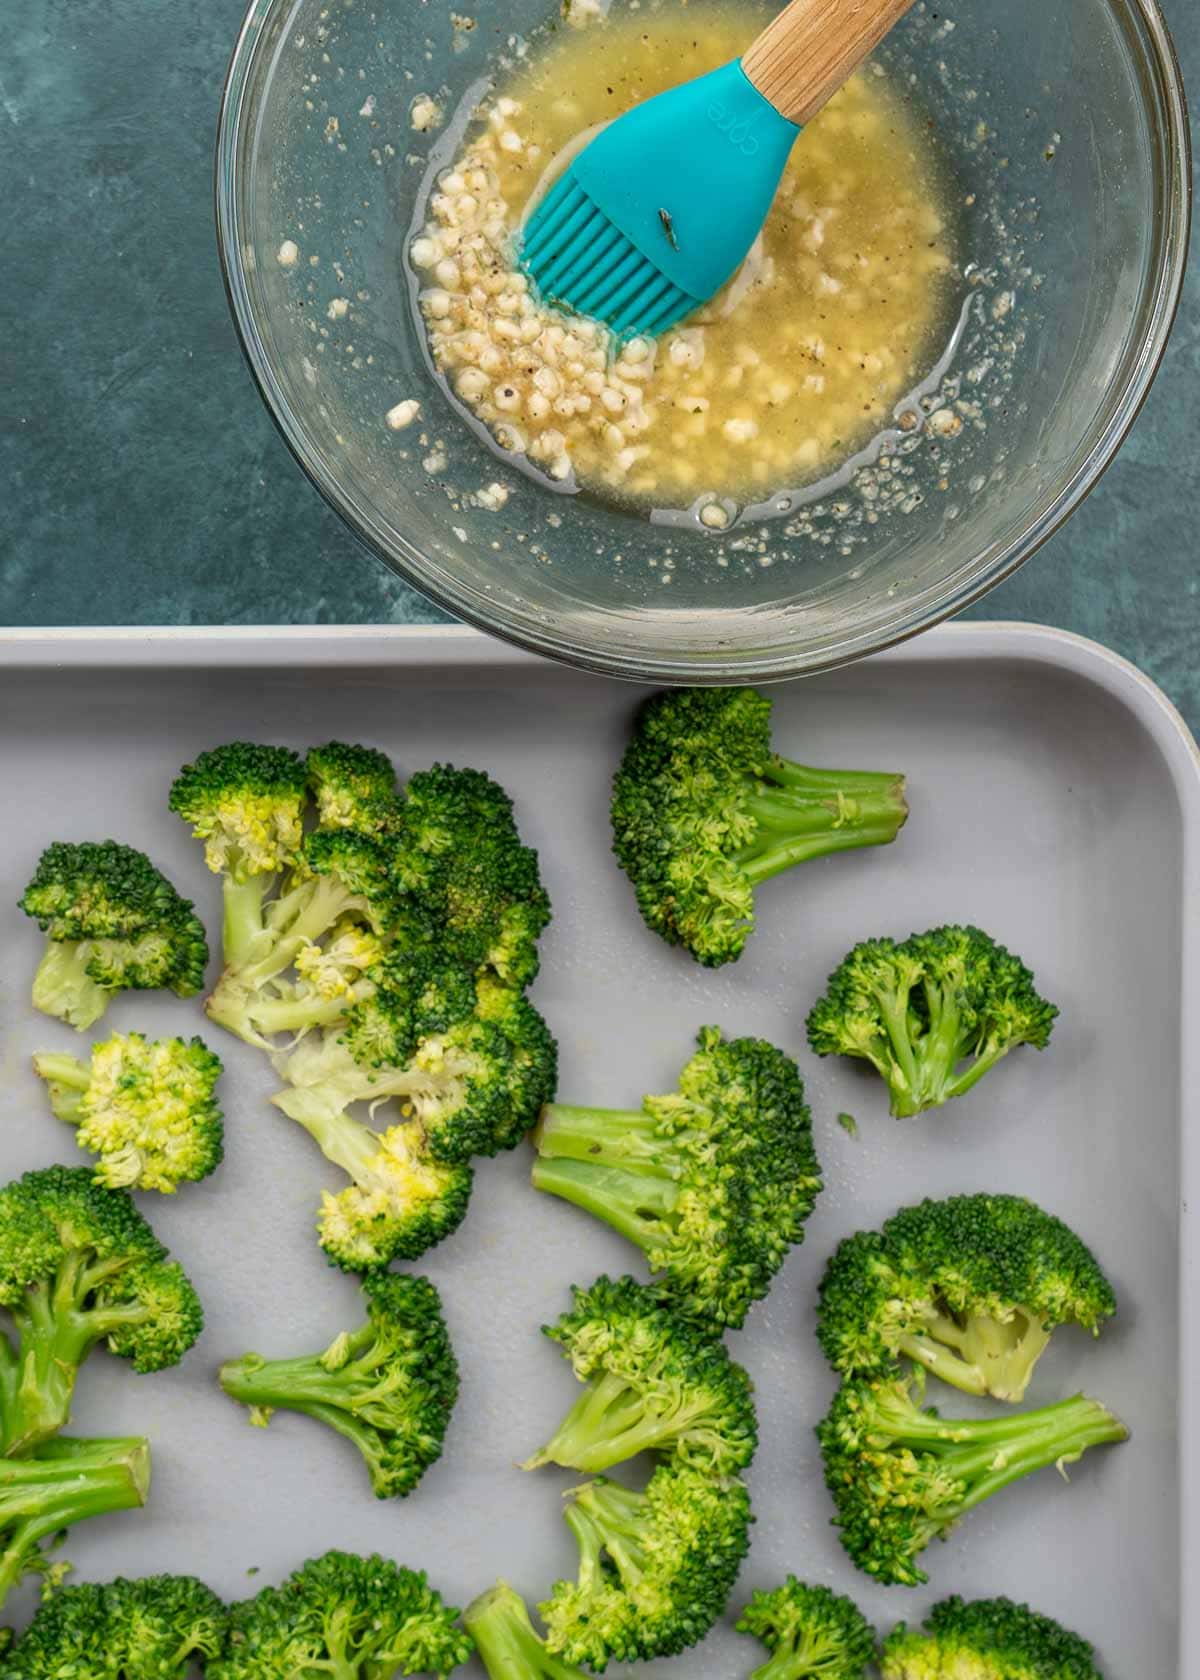 butter, garlic, and seasonings being mixed in a bowl beside a pan full of smashed broccoli